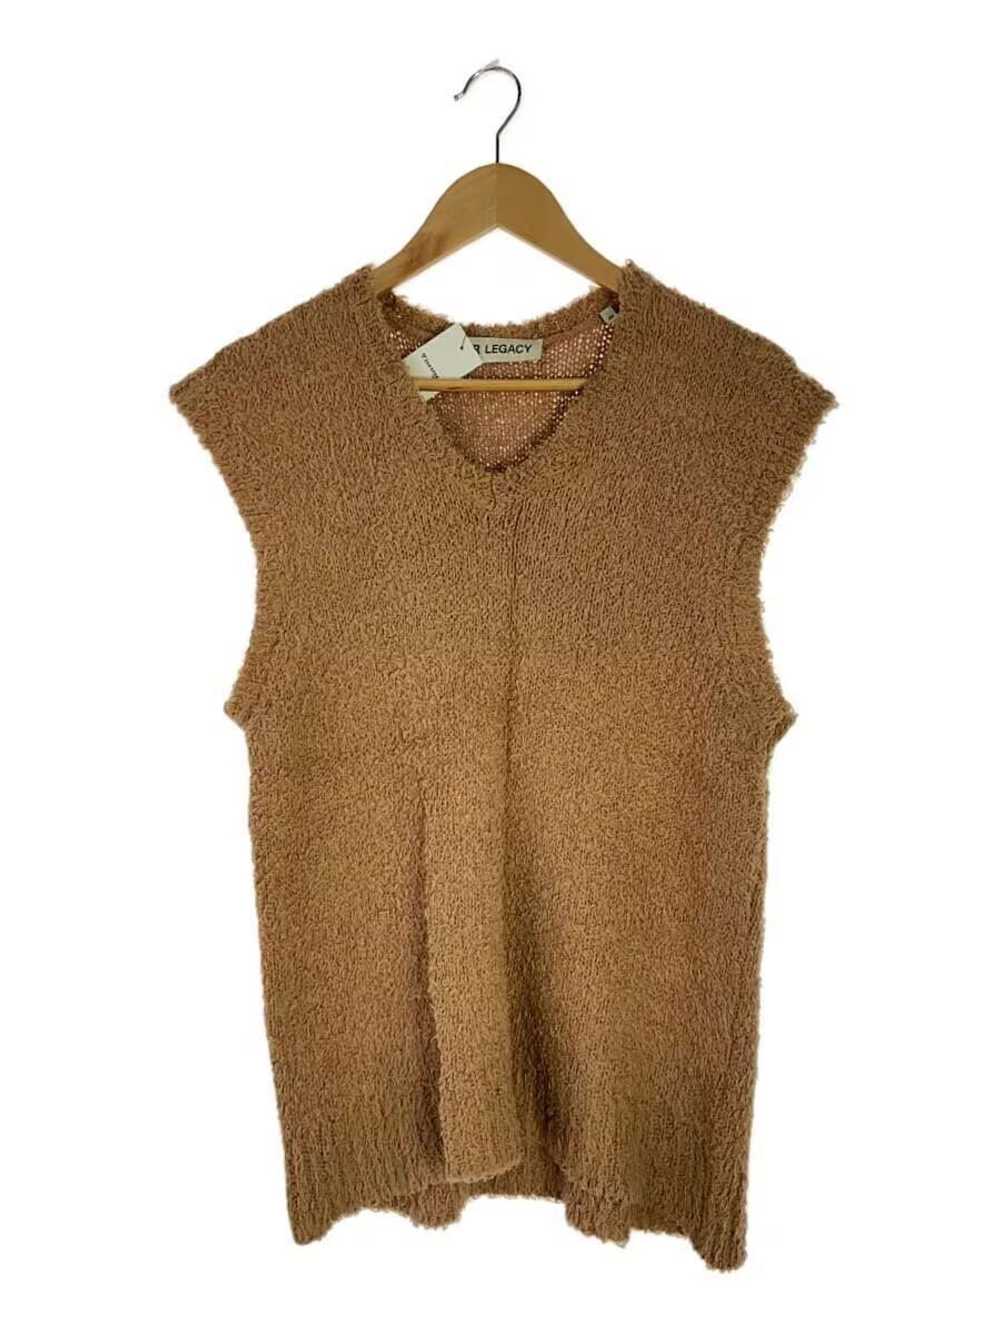 Our Legacy Fuzzy Knit Sweater Vest - image 2